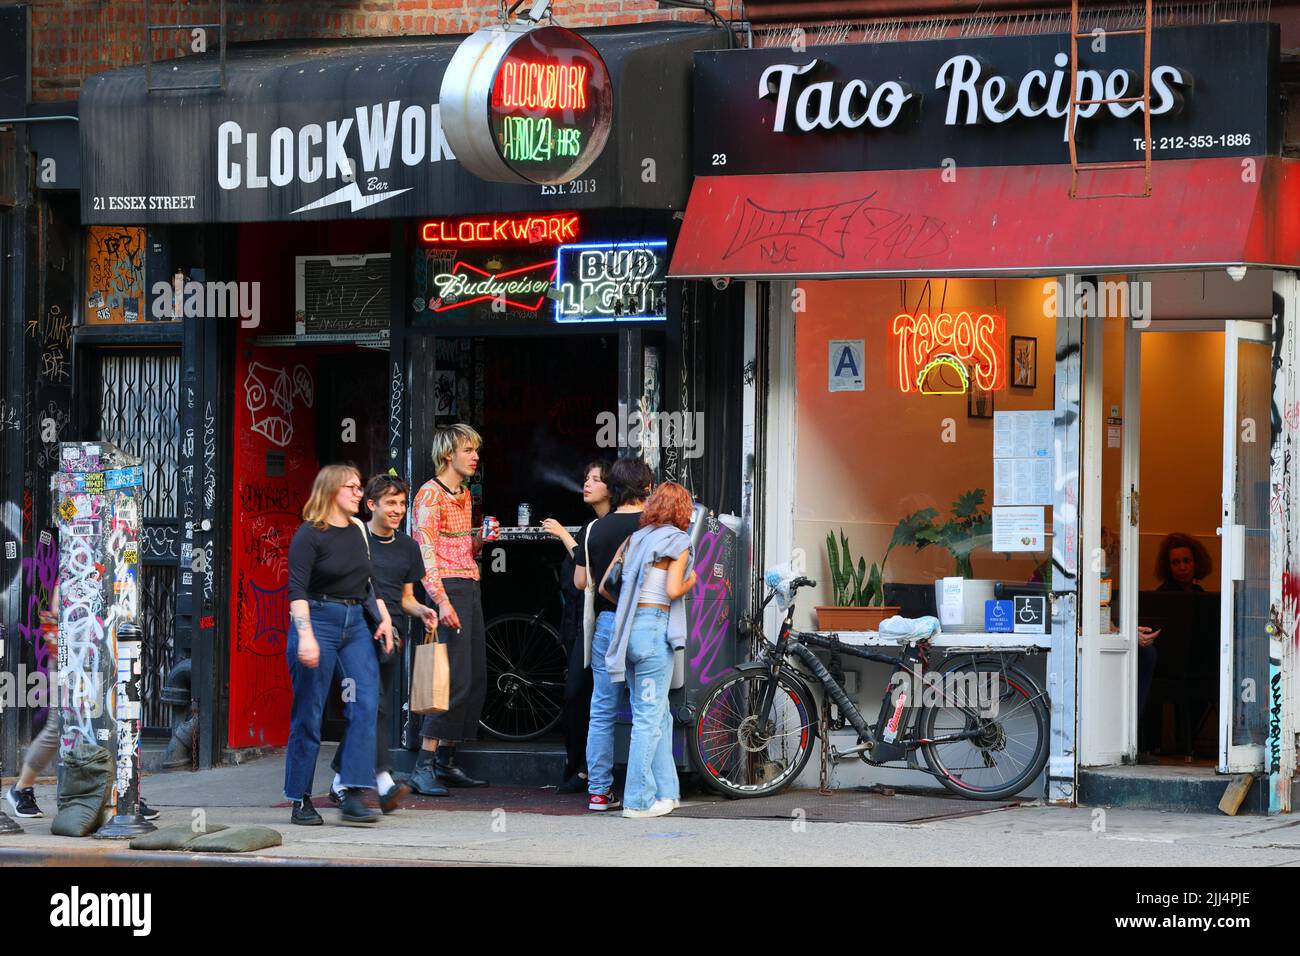 Clockwork Bar, 21 Essex St; Taco Recipes, 23 Essex St, New York, NY. Gen Z zoomers, and millenials outside a bar in Manhattan's Lower East Side. Stock Photo